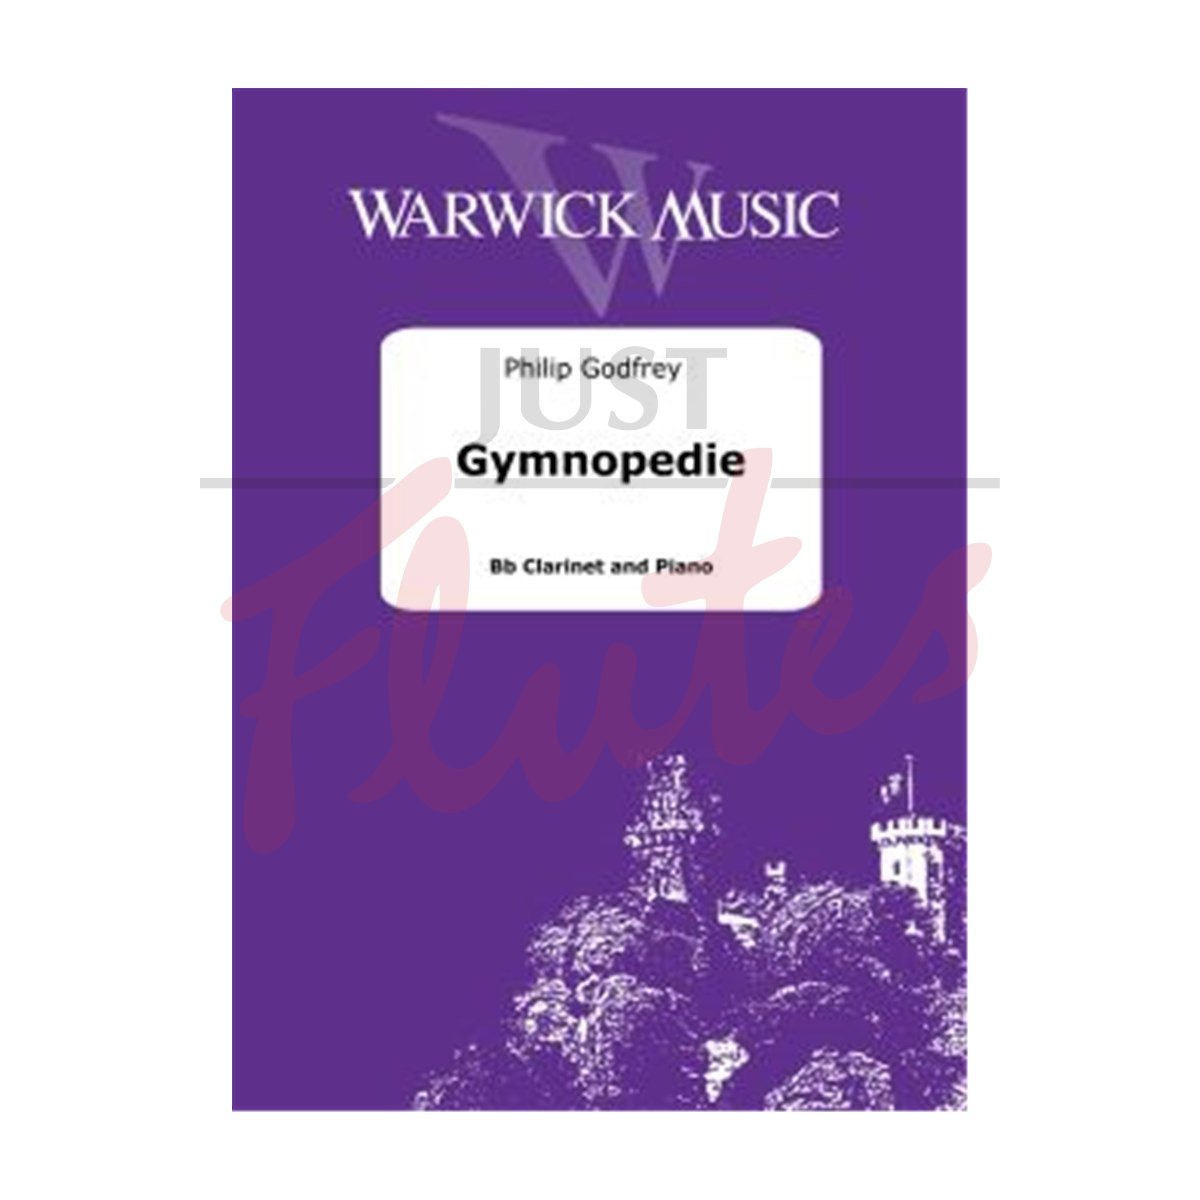 Gymnopedie for Clarinet and Piano